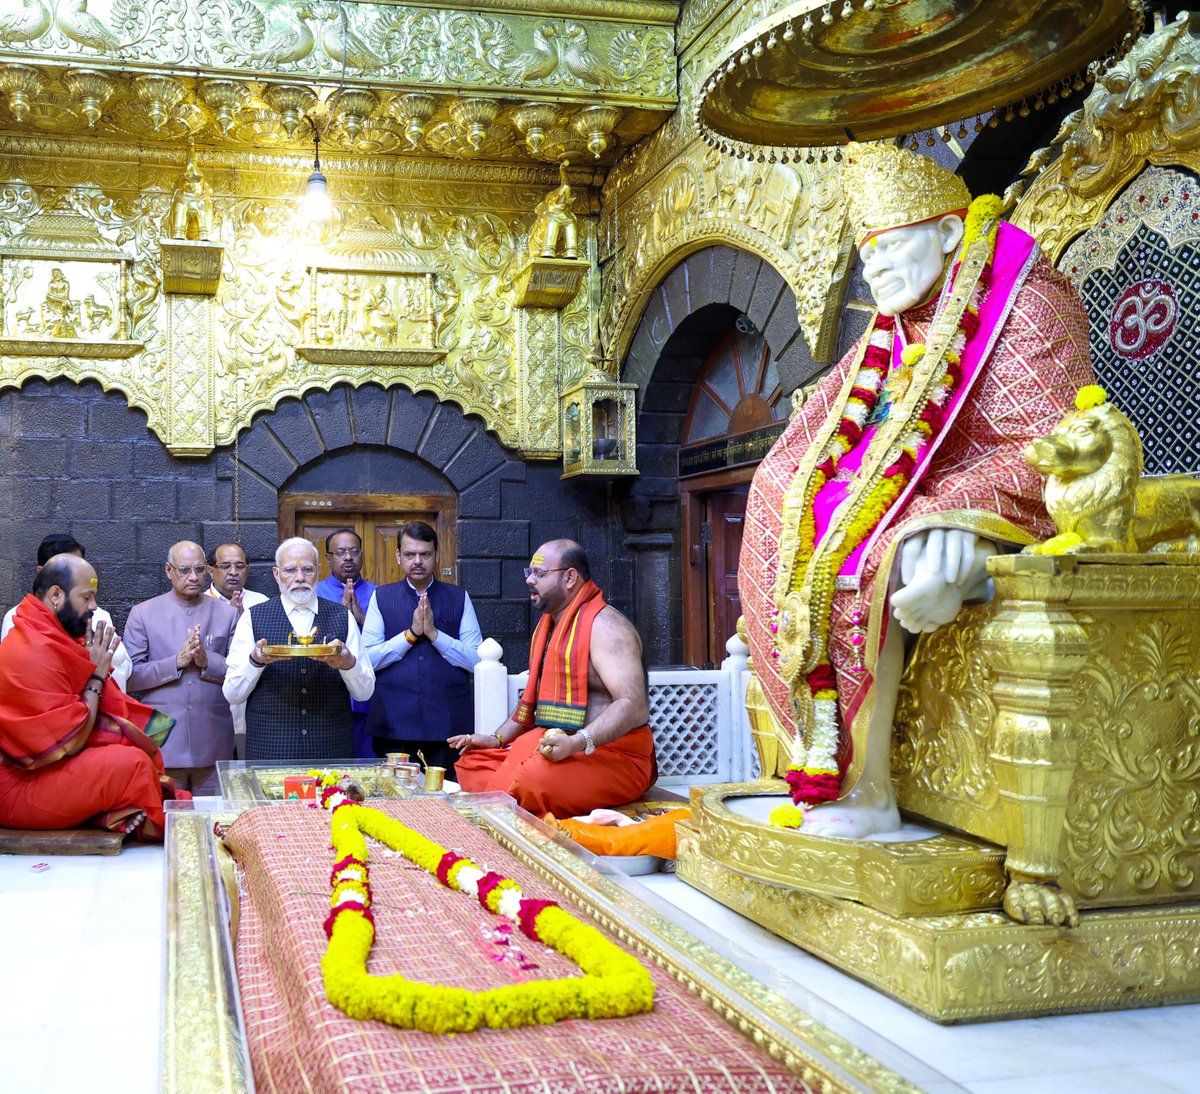 Prayed at the Shri Saibaba Samadhi Temple. Sought blessings for the progress of India and the prosperity of every Indian.